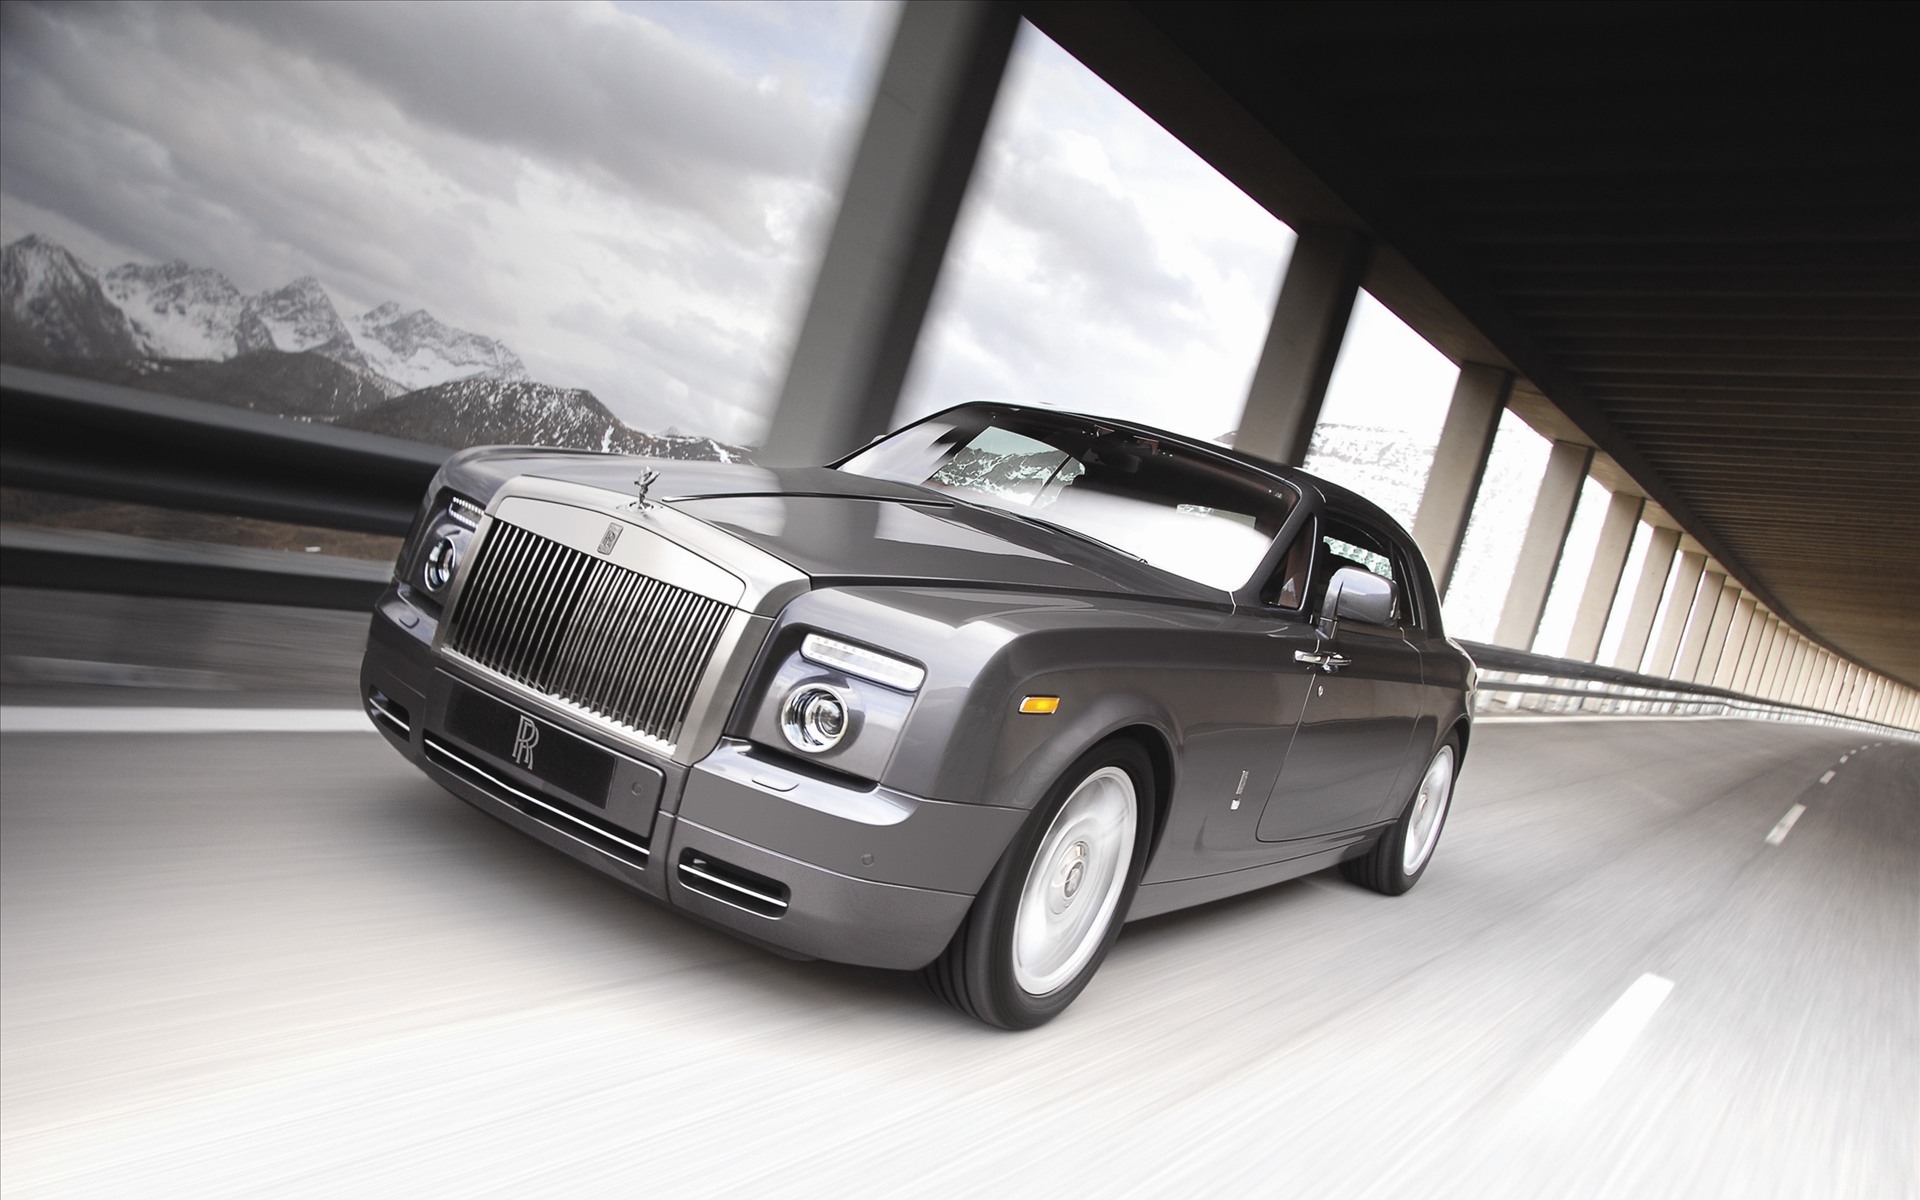 Superb Silver Rolls Royce for 1920 x 1200 widescreen resolution